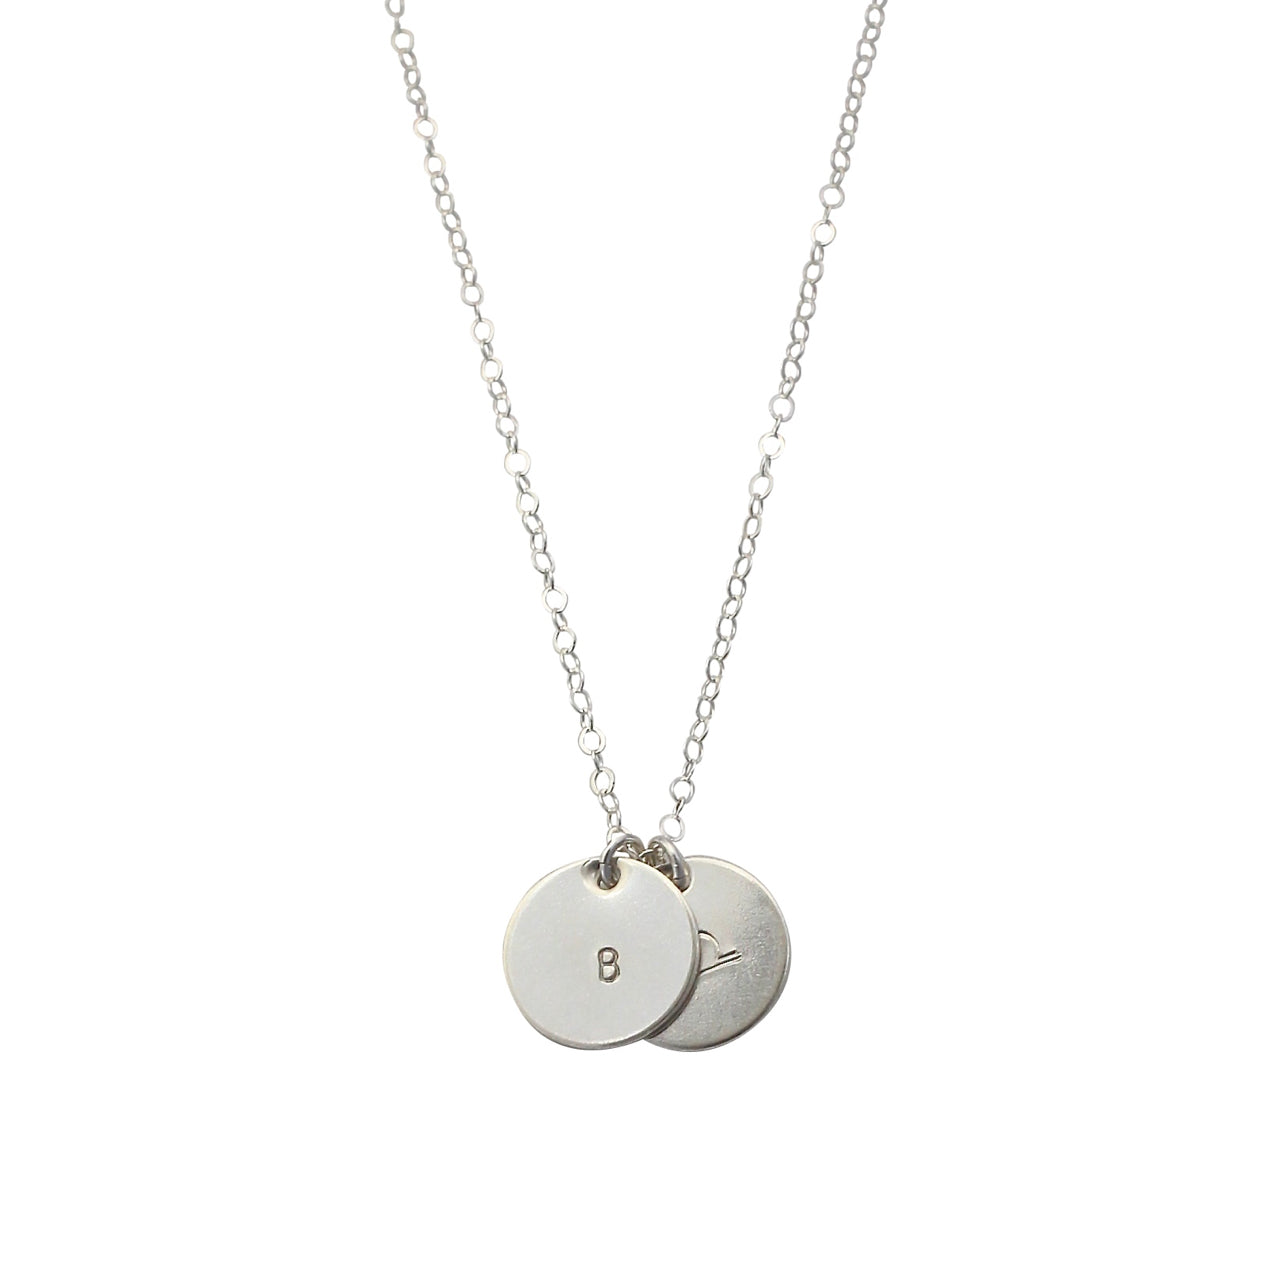 Silver Initial This necklace with two discs